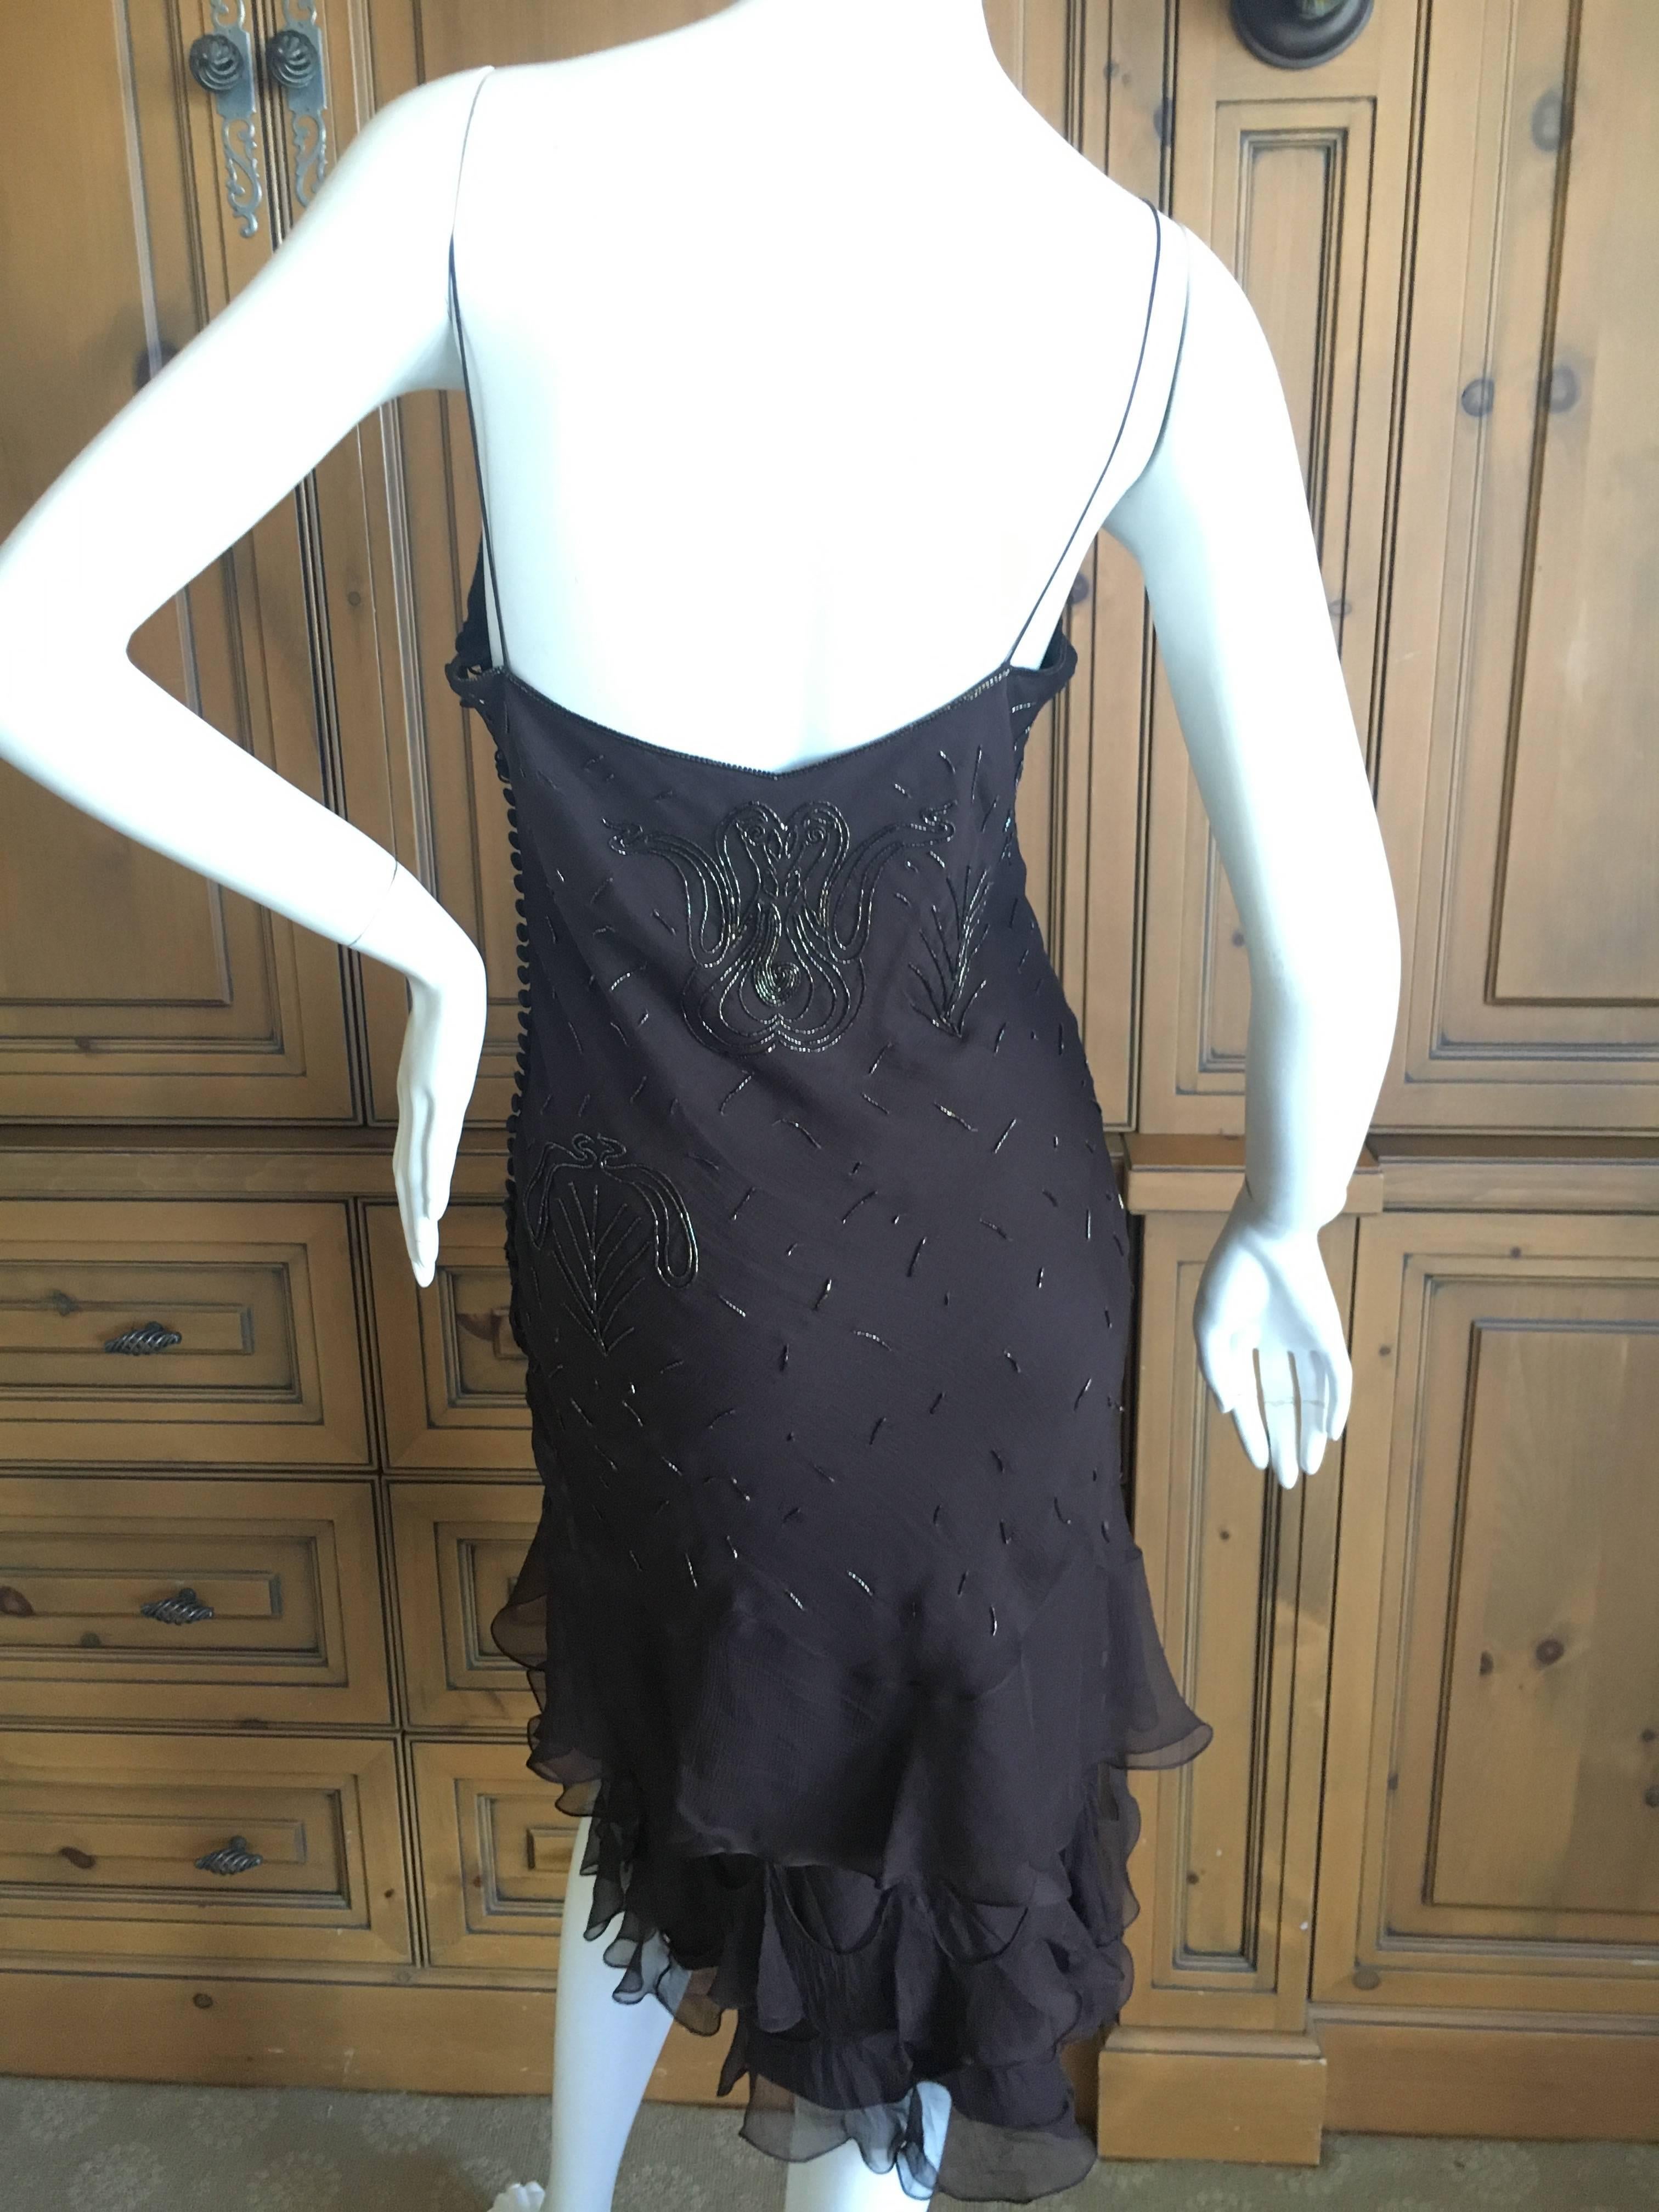 Christian Dior Bead Embellished Silk Chiffon Cocktail Dress by John Galliano  For Sale 5